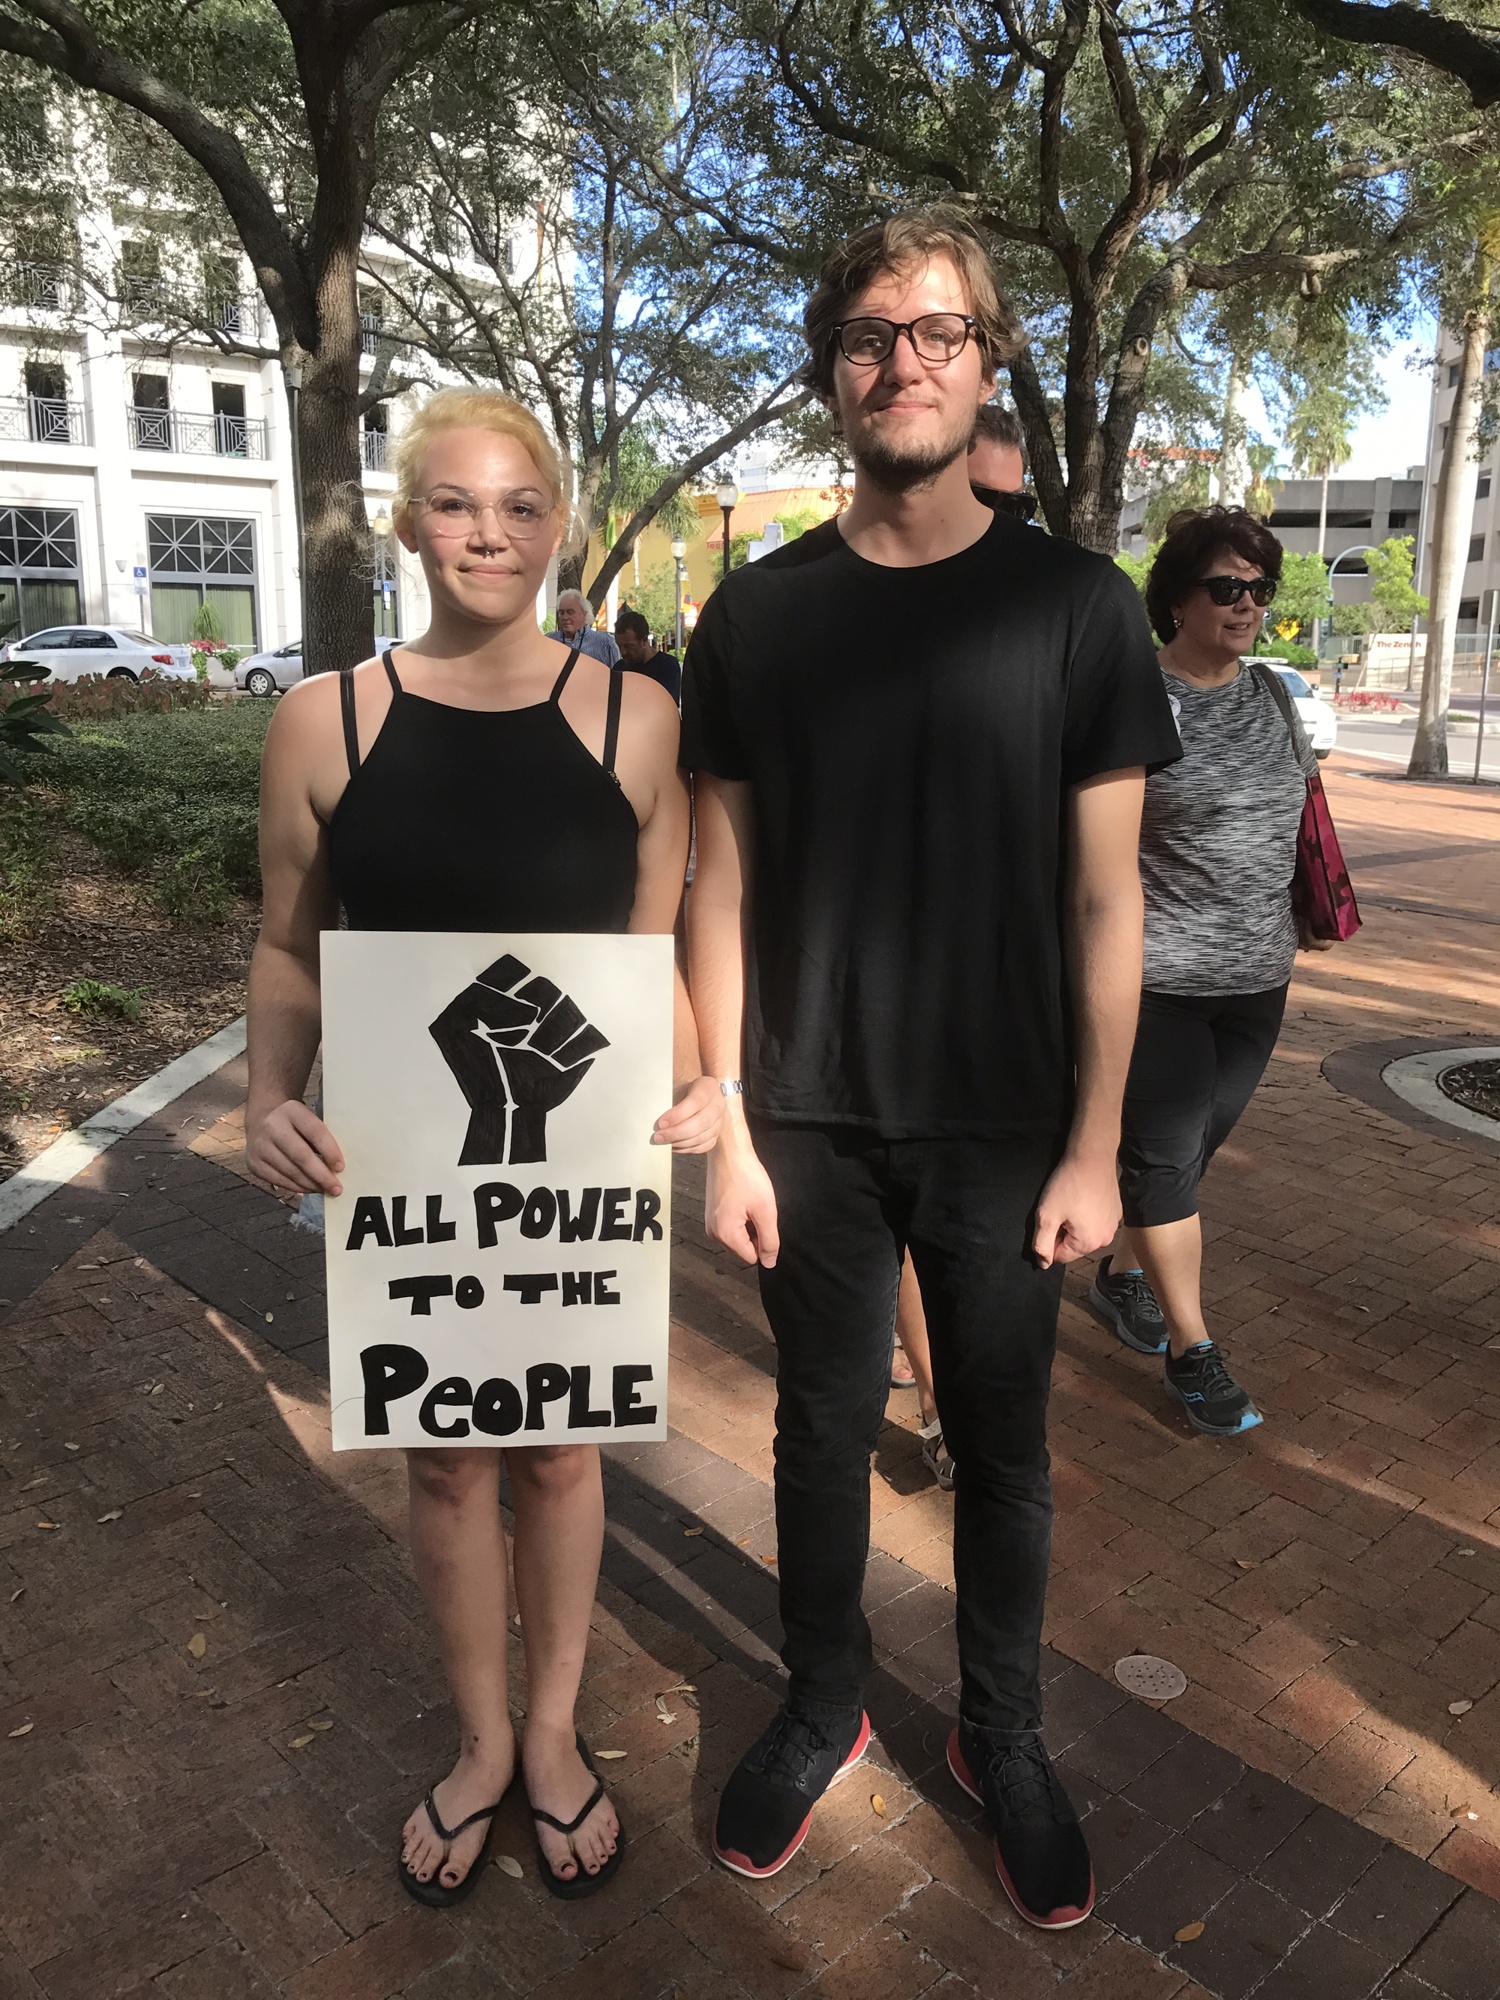 Alexis Jackson and Ryan Francis attended the rally to show that they do not support the events that took place on Aug. 12 in Charlottesville.